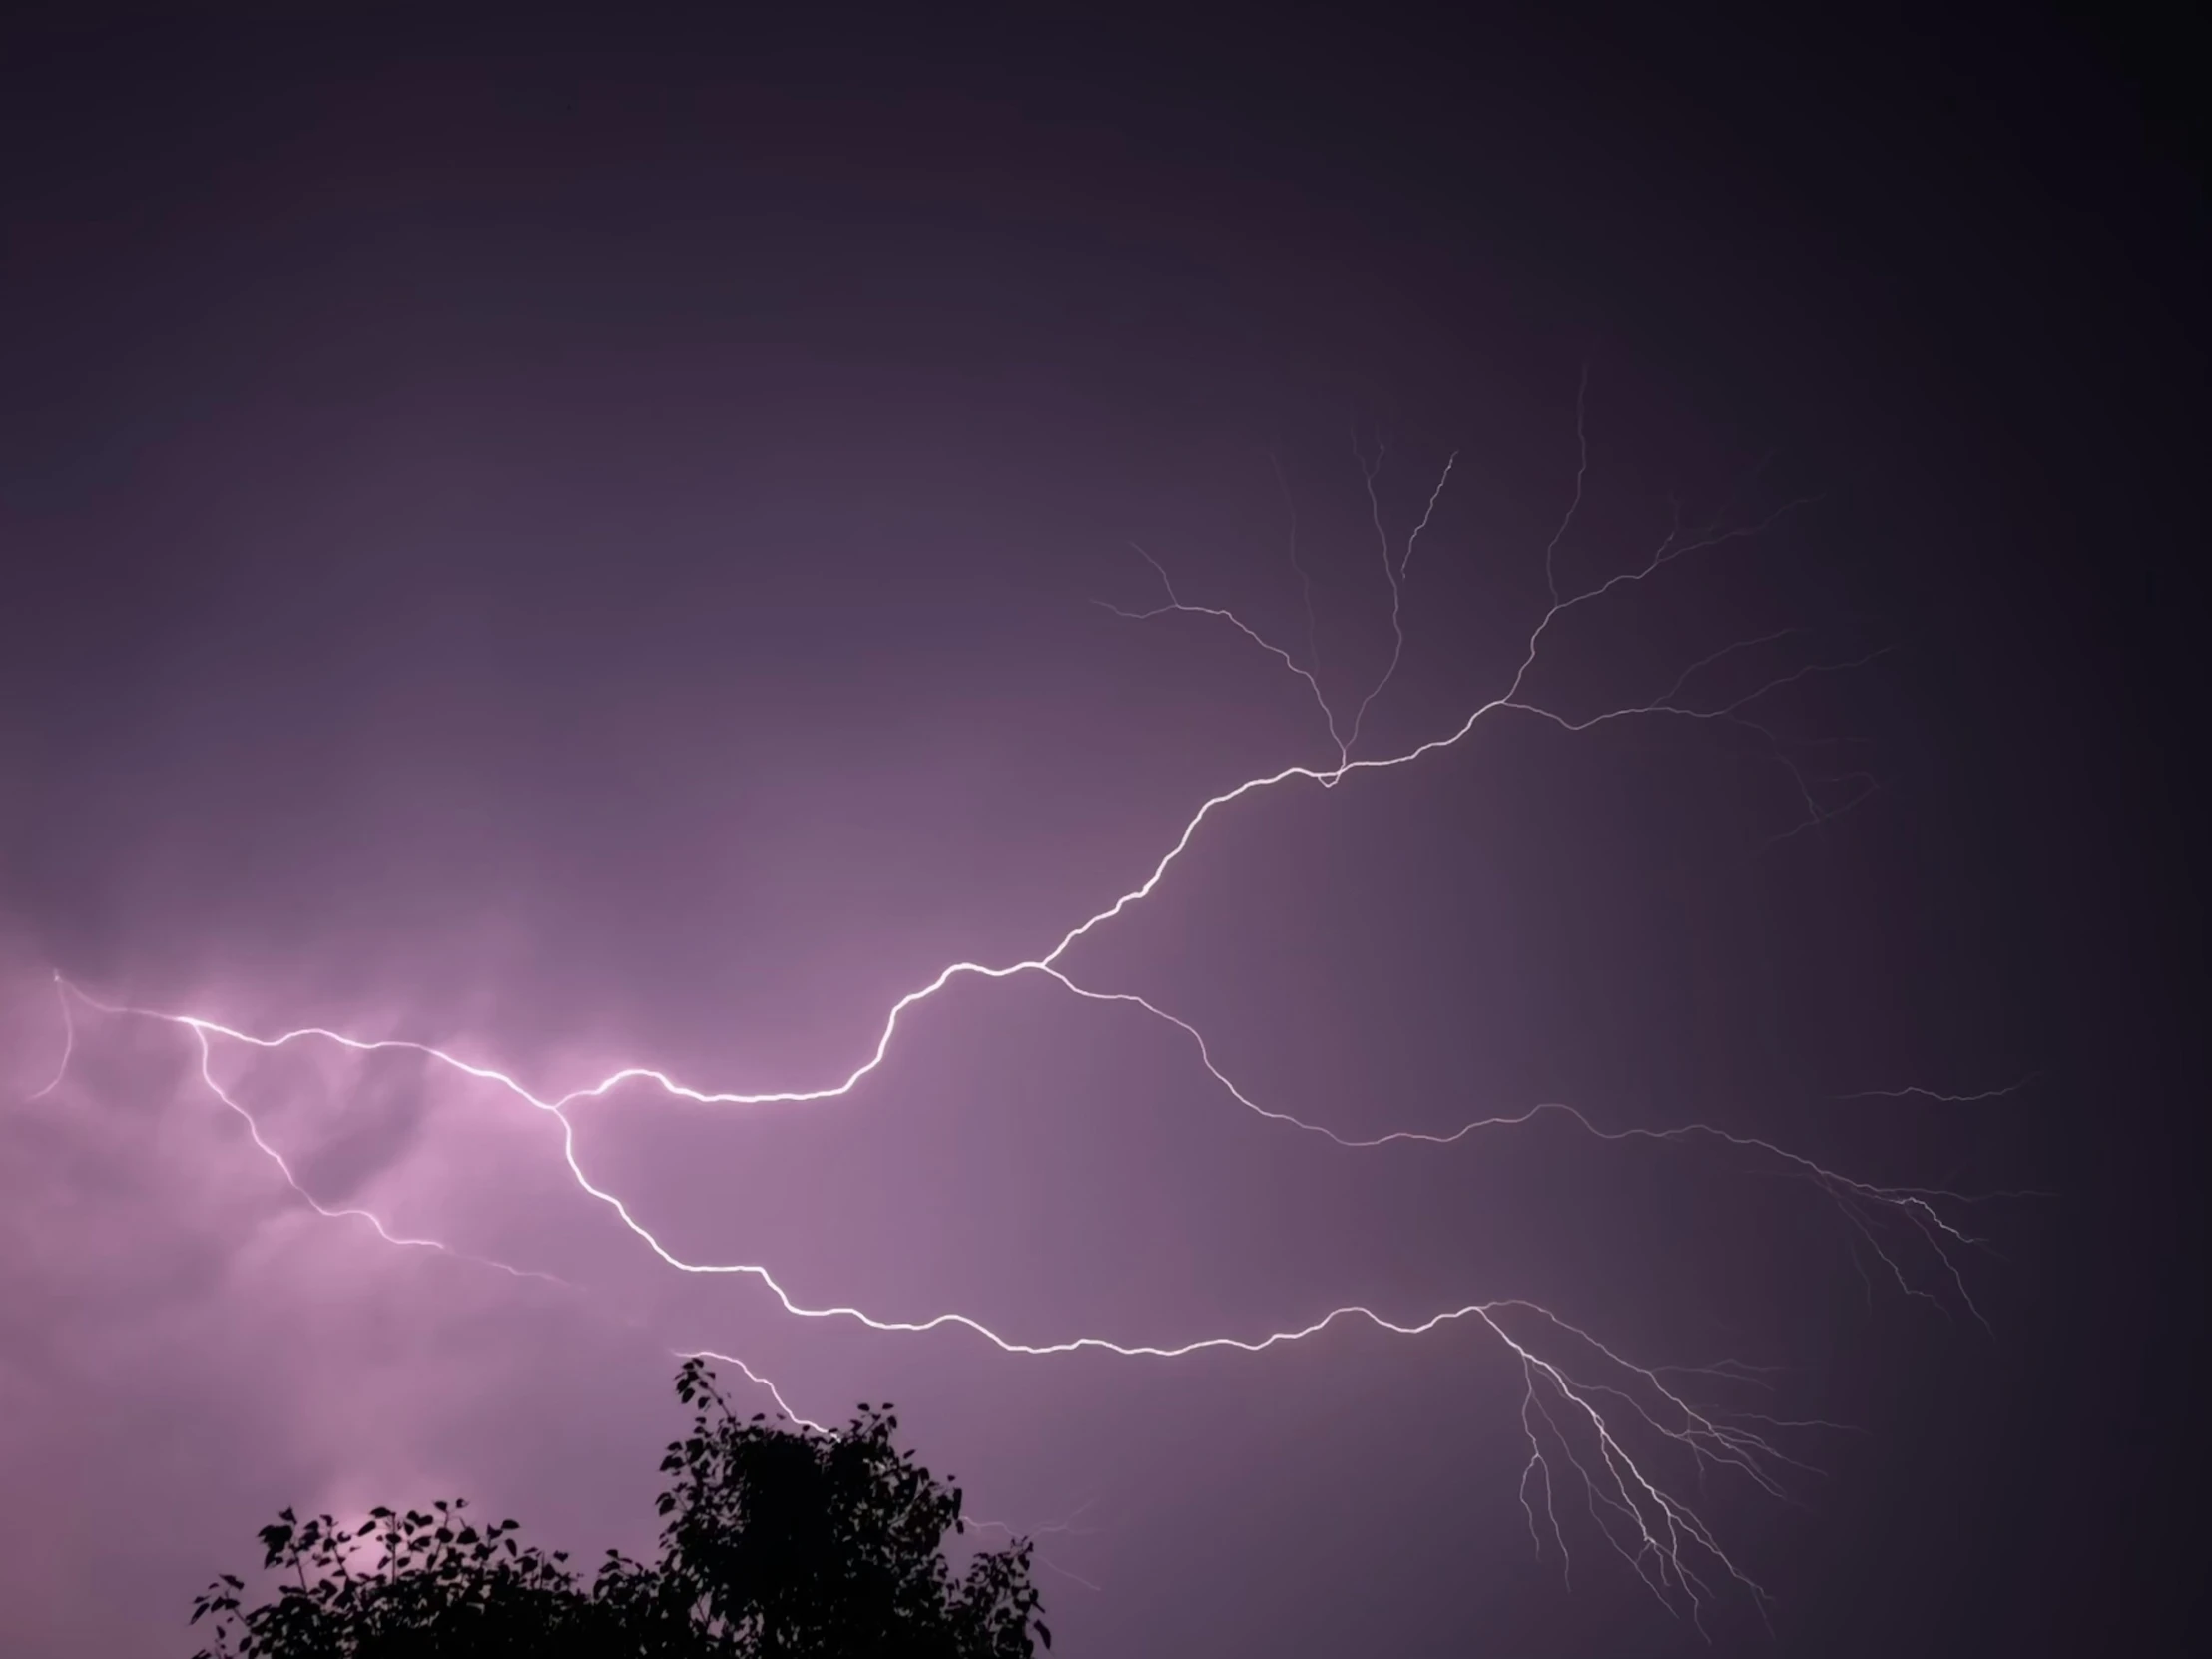 a lightning strike shows only one electrical bolt